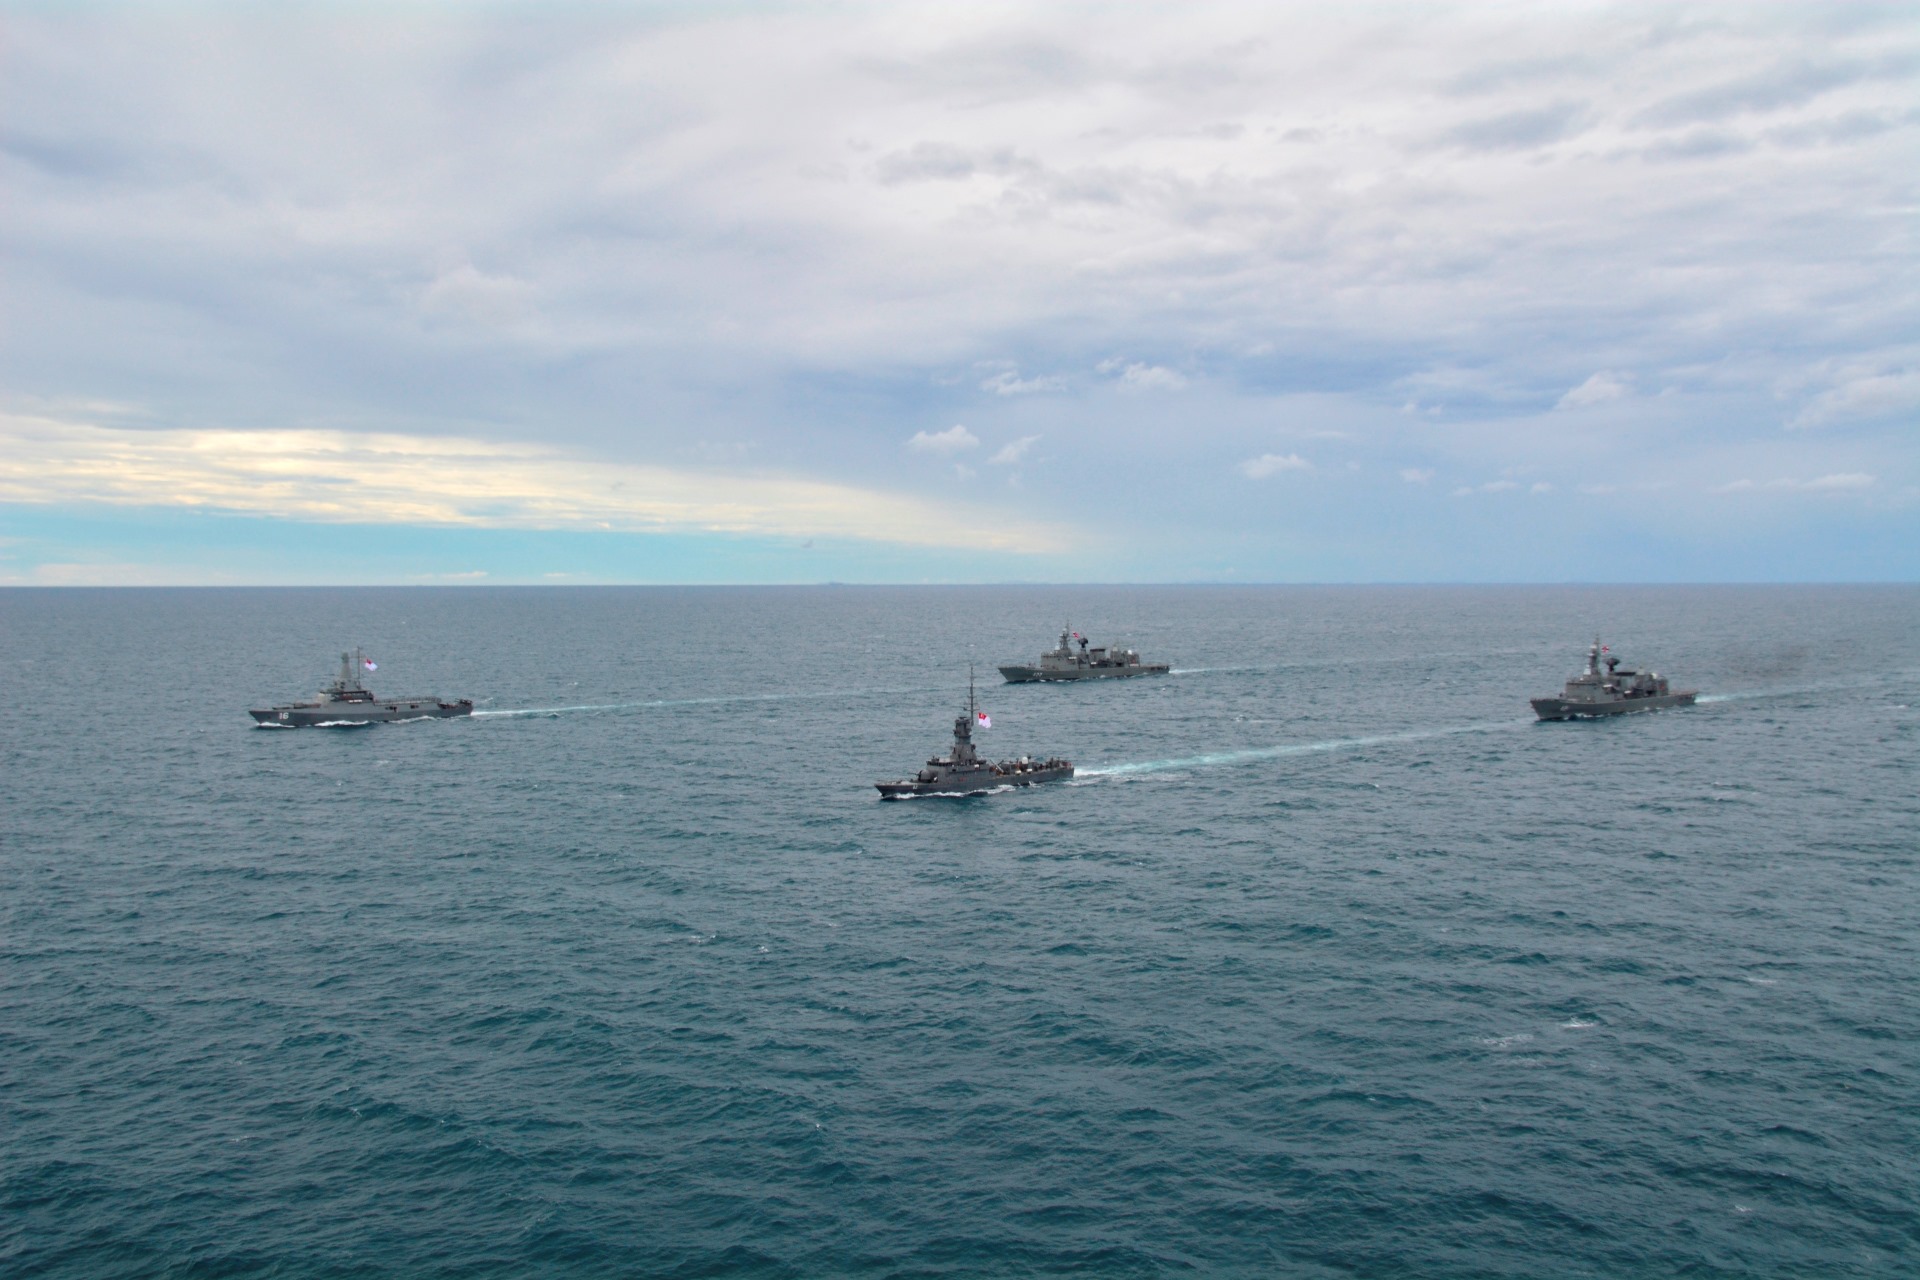 Republic of Singapore Navy (RSN) and Royal Thai Navy (RTN) ships sailing in formation as part of Exercise Singsiam 2018.